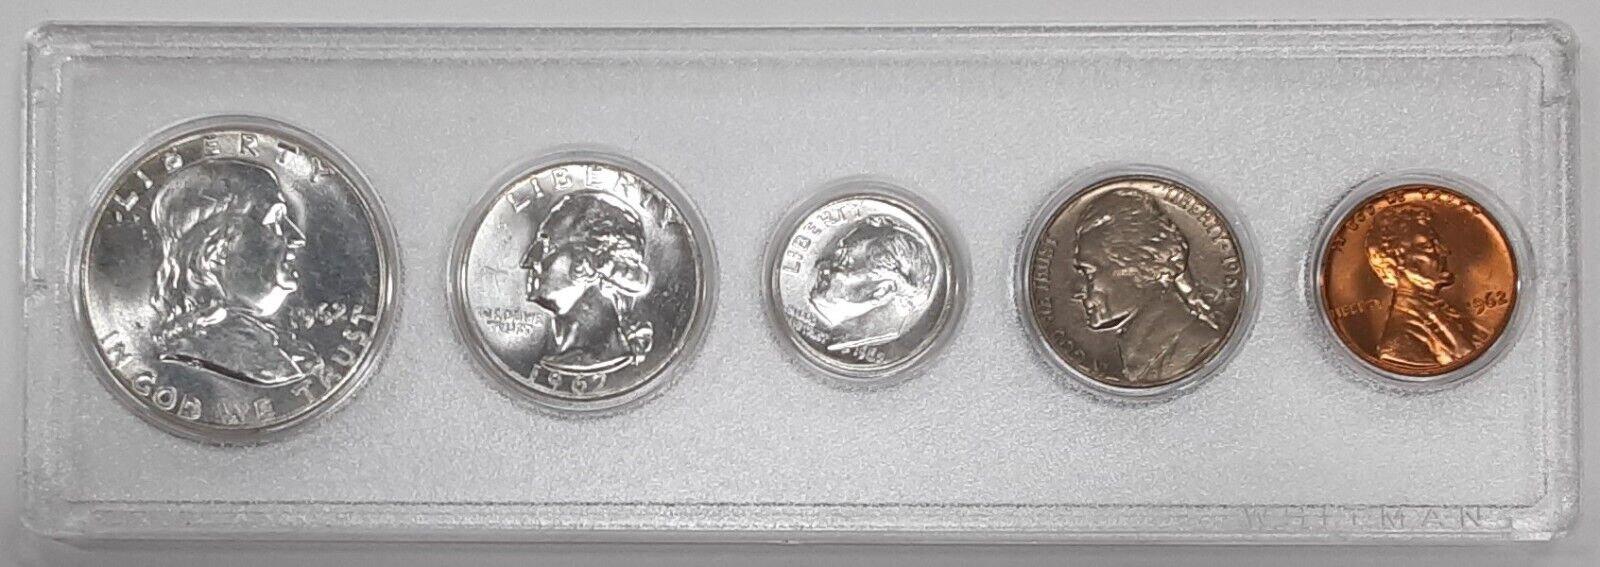 1962 US Uncirculated Year Set with Silver Half Quarter and Dime 5 Coins Total